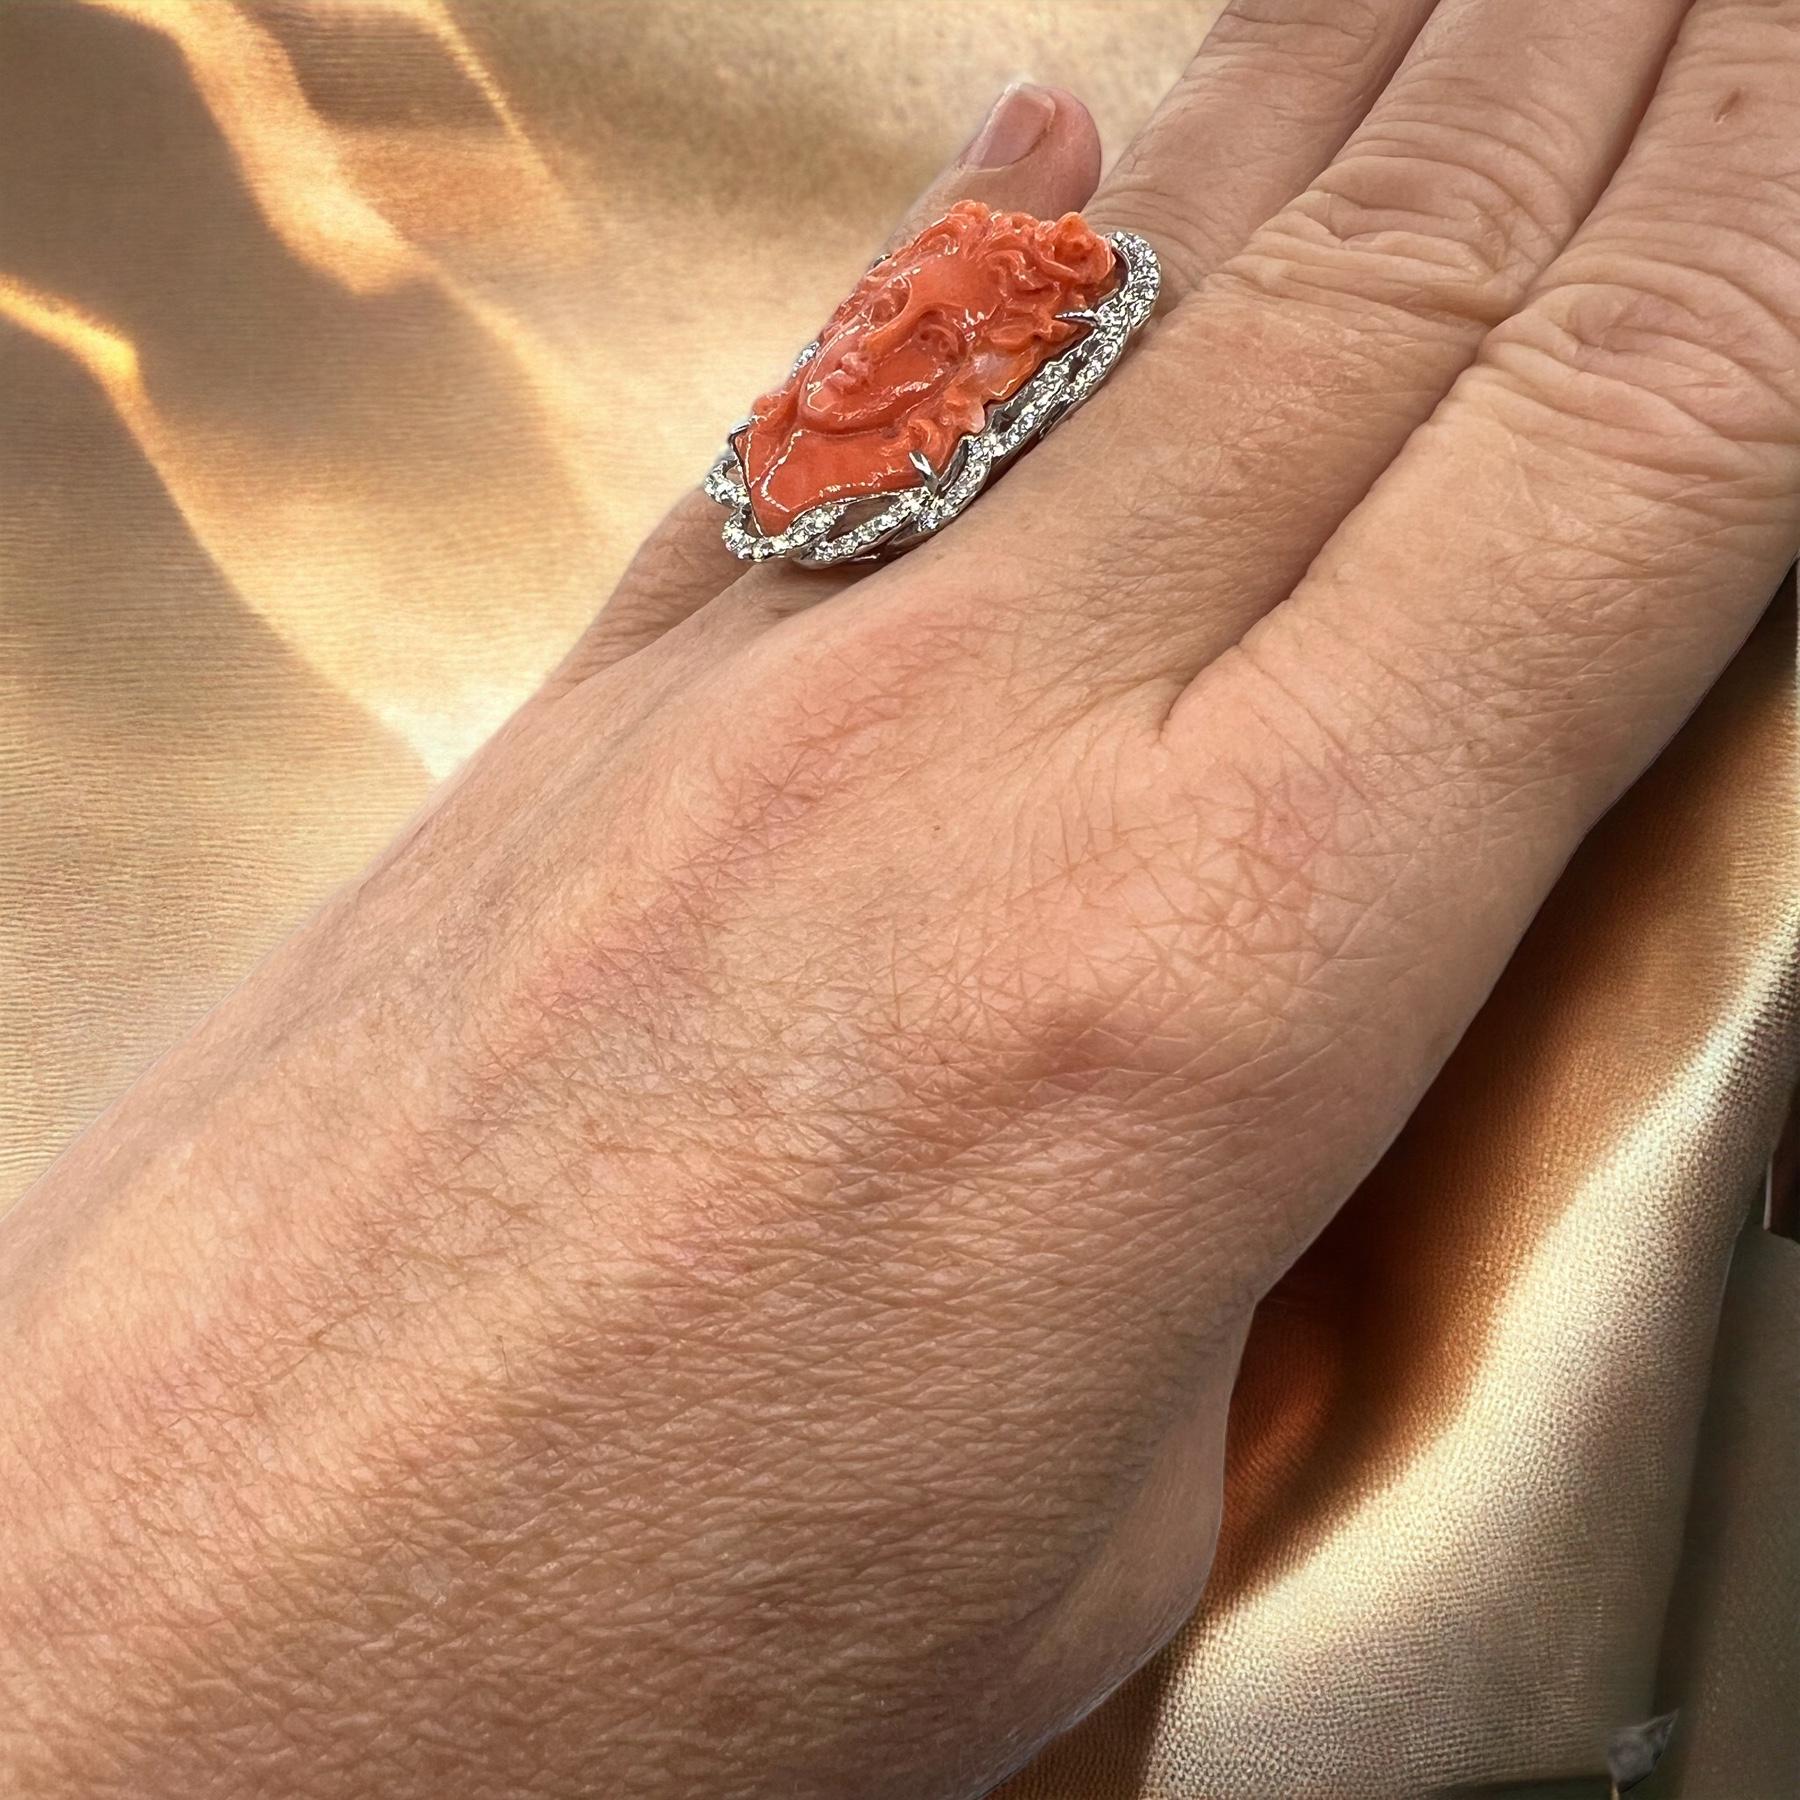 18 Carat Gold Cocktail Ring: Coral Cameo Ring Surrounded by Diamonds 2